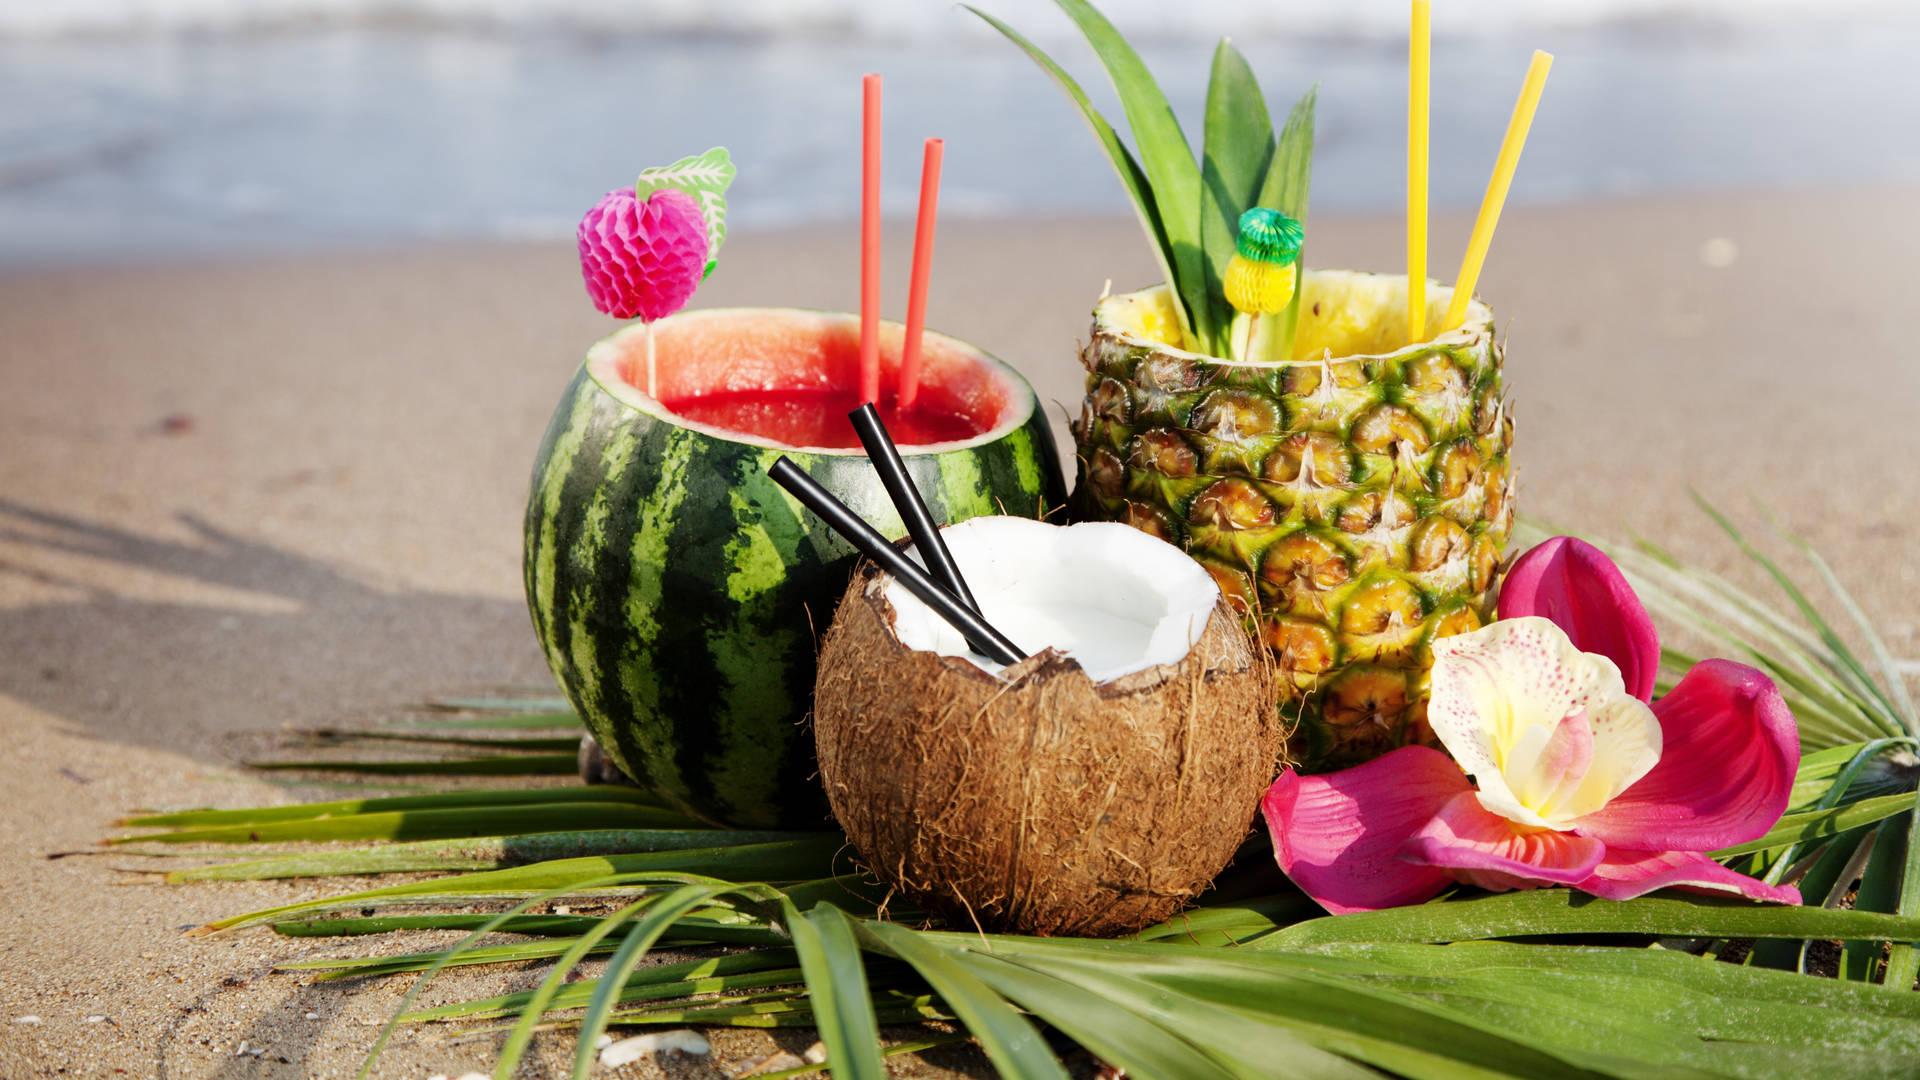 Watermelon, Pineapple And Coco Tropical Drinks Background